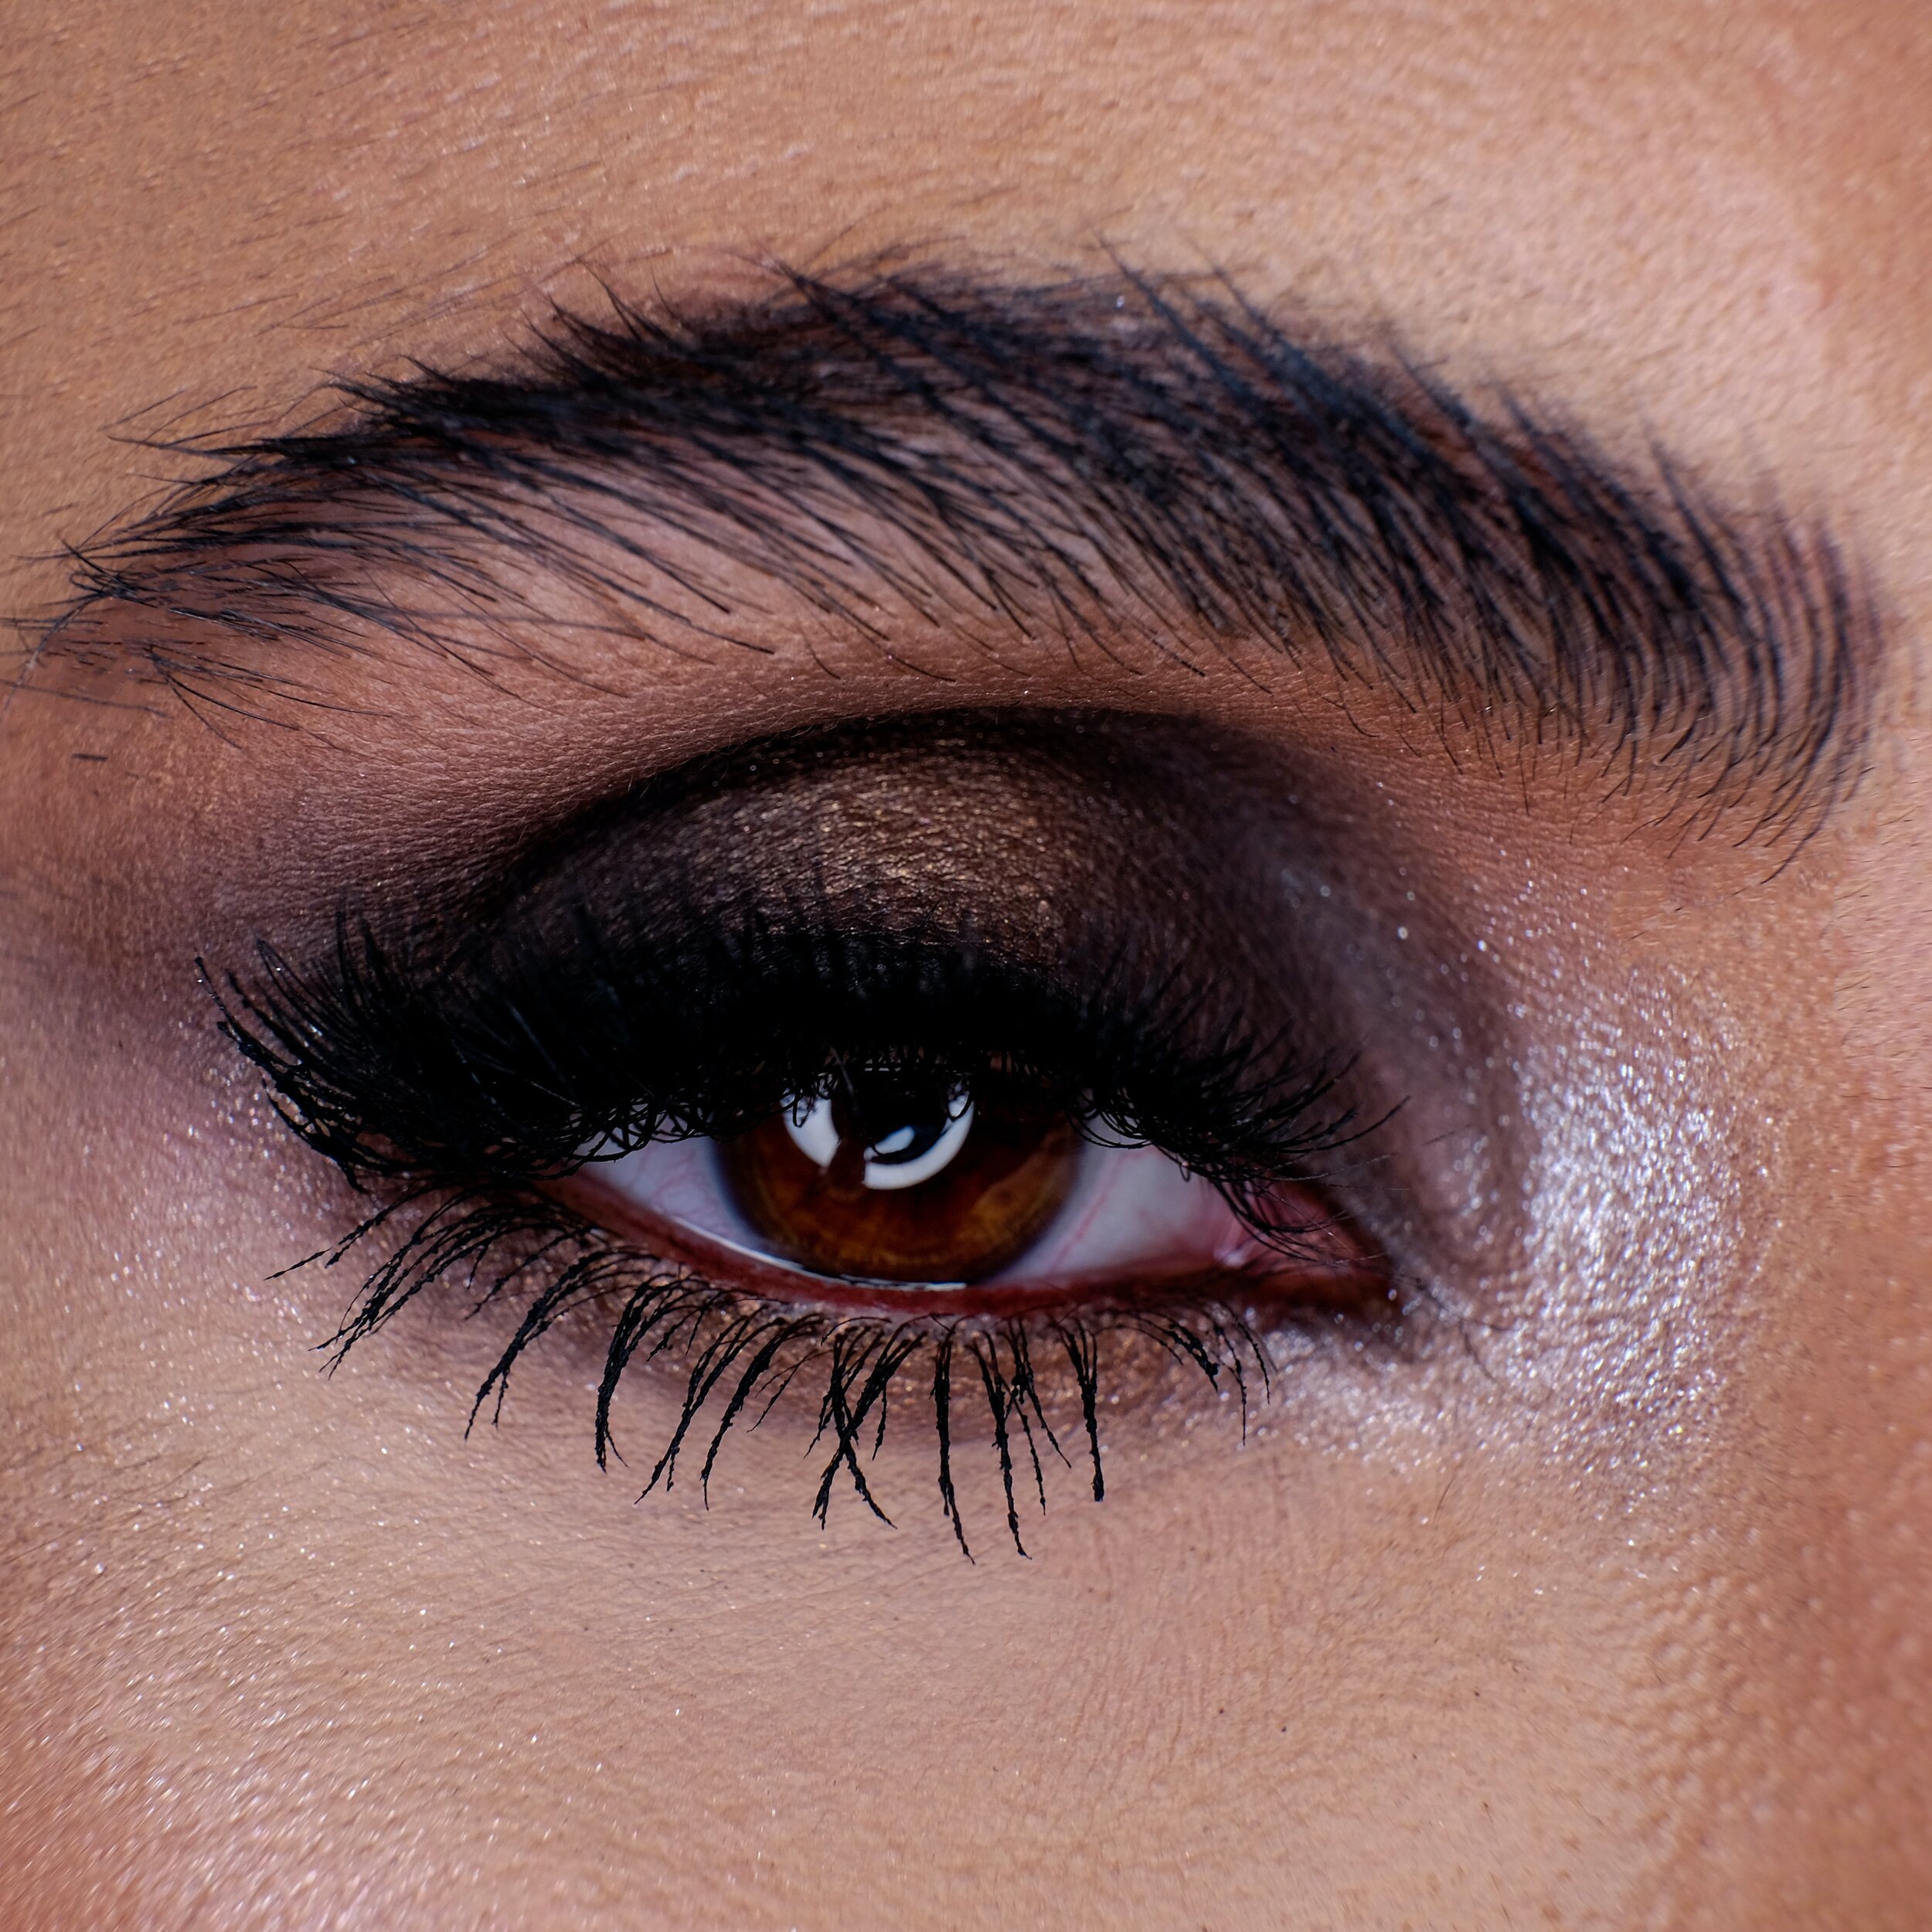 Example of Smoky Eye Look with brown eyes, and brown hue eye shadow applied both to upper eyelid and lower. Photo by Romina Farías on Unsplash.